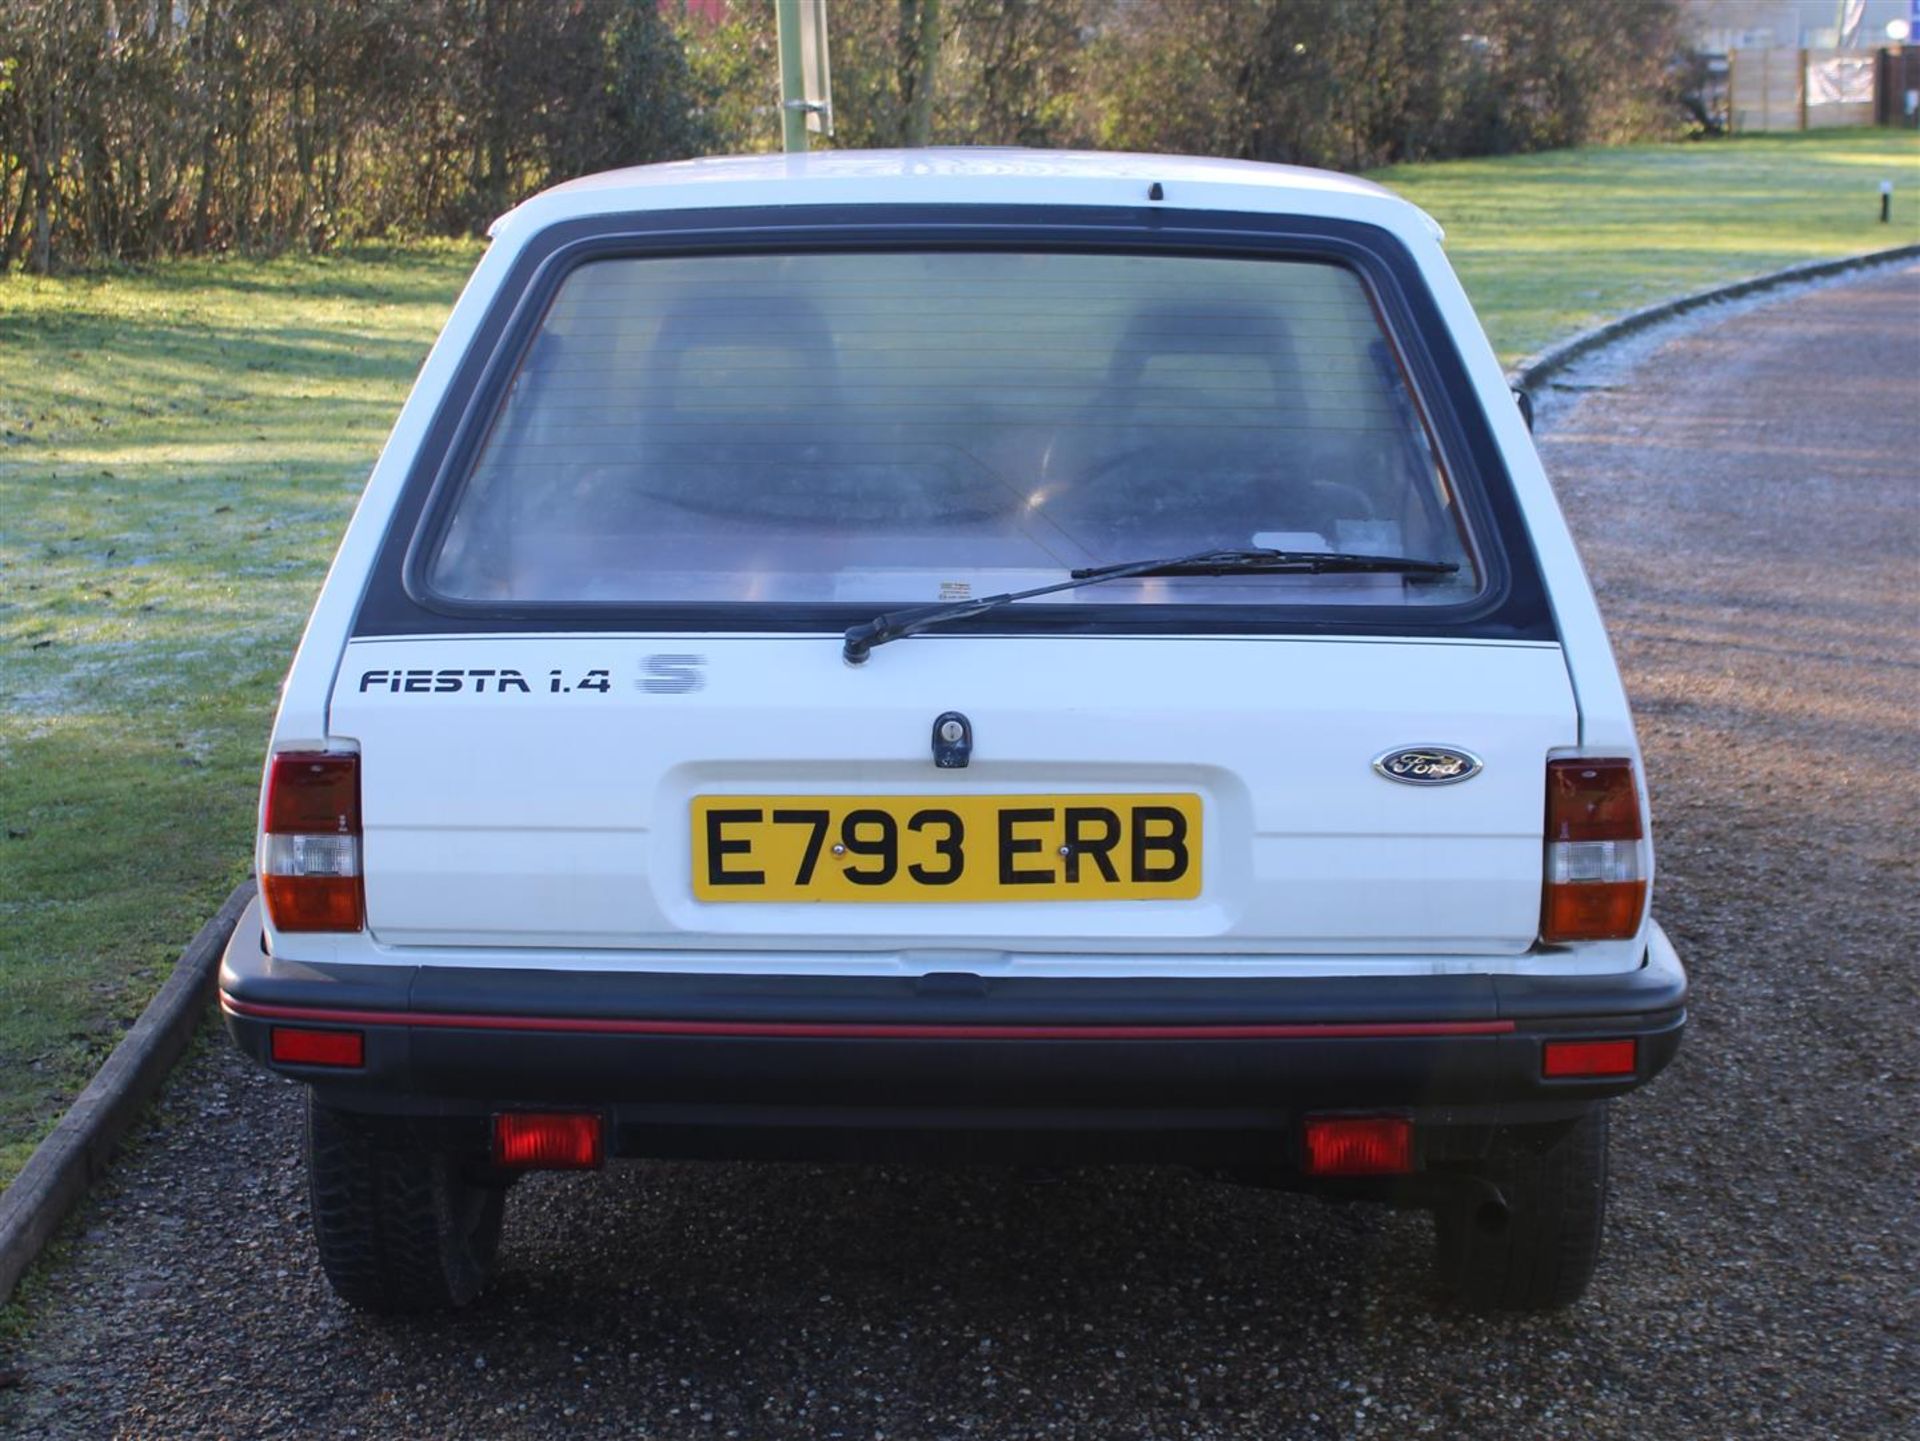 1987 Ford Fiesta 1.4 S Mk2 - Image 5 of 29